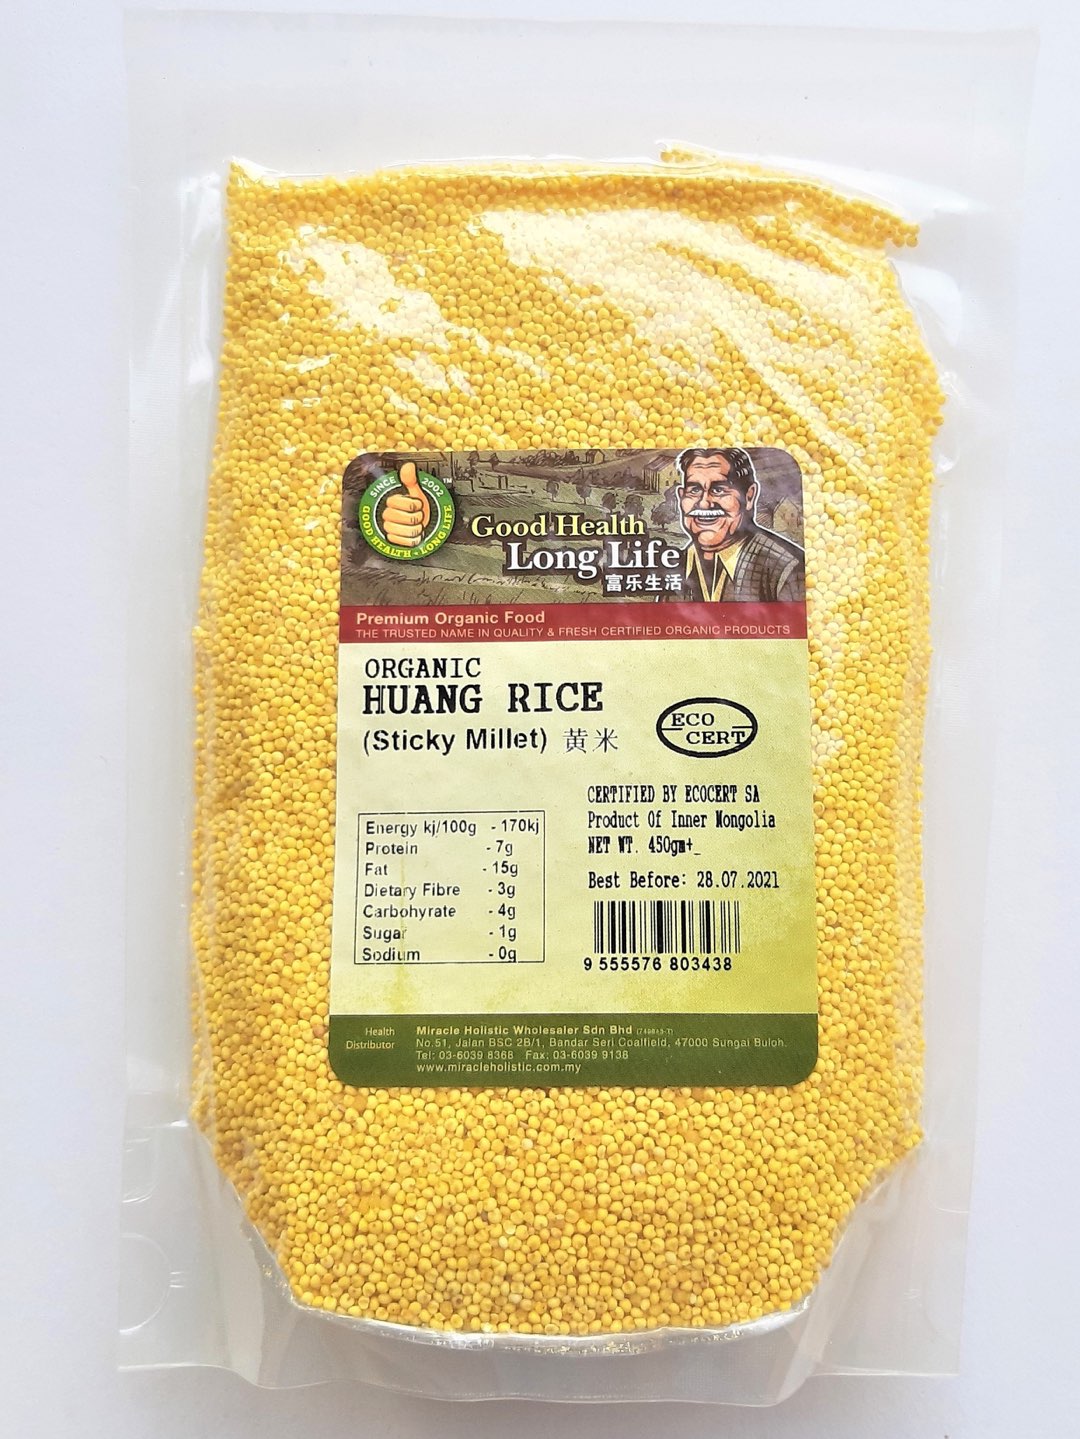 MIRACLE HOLISTIC ORG HUANG MI STICKY MILLET 450G